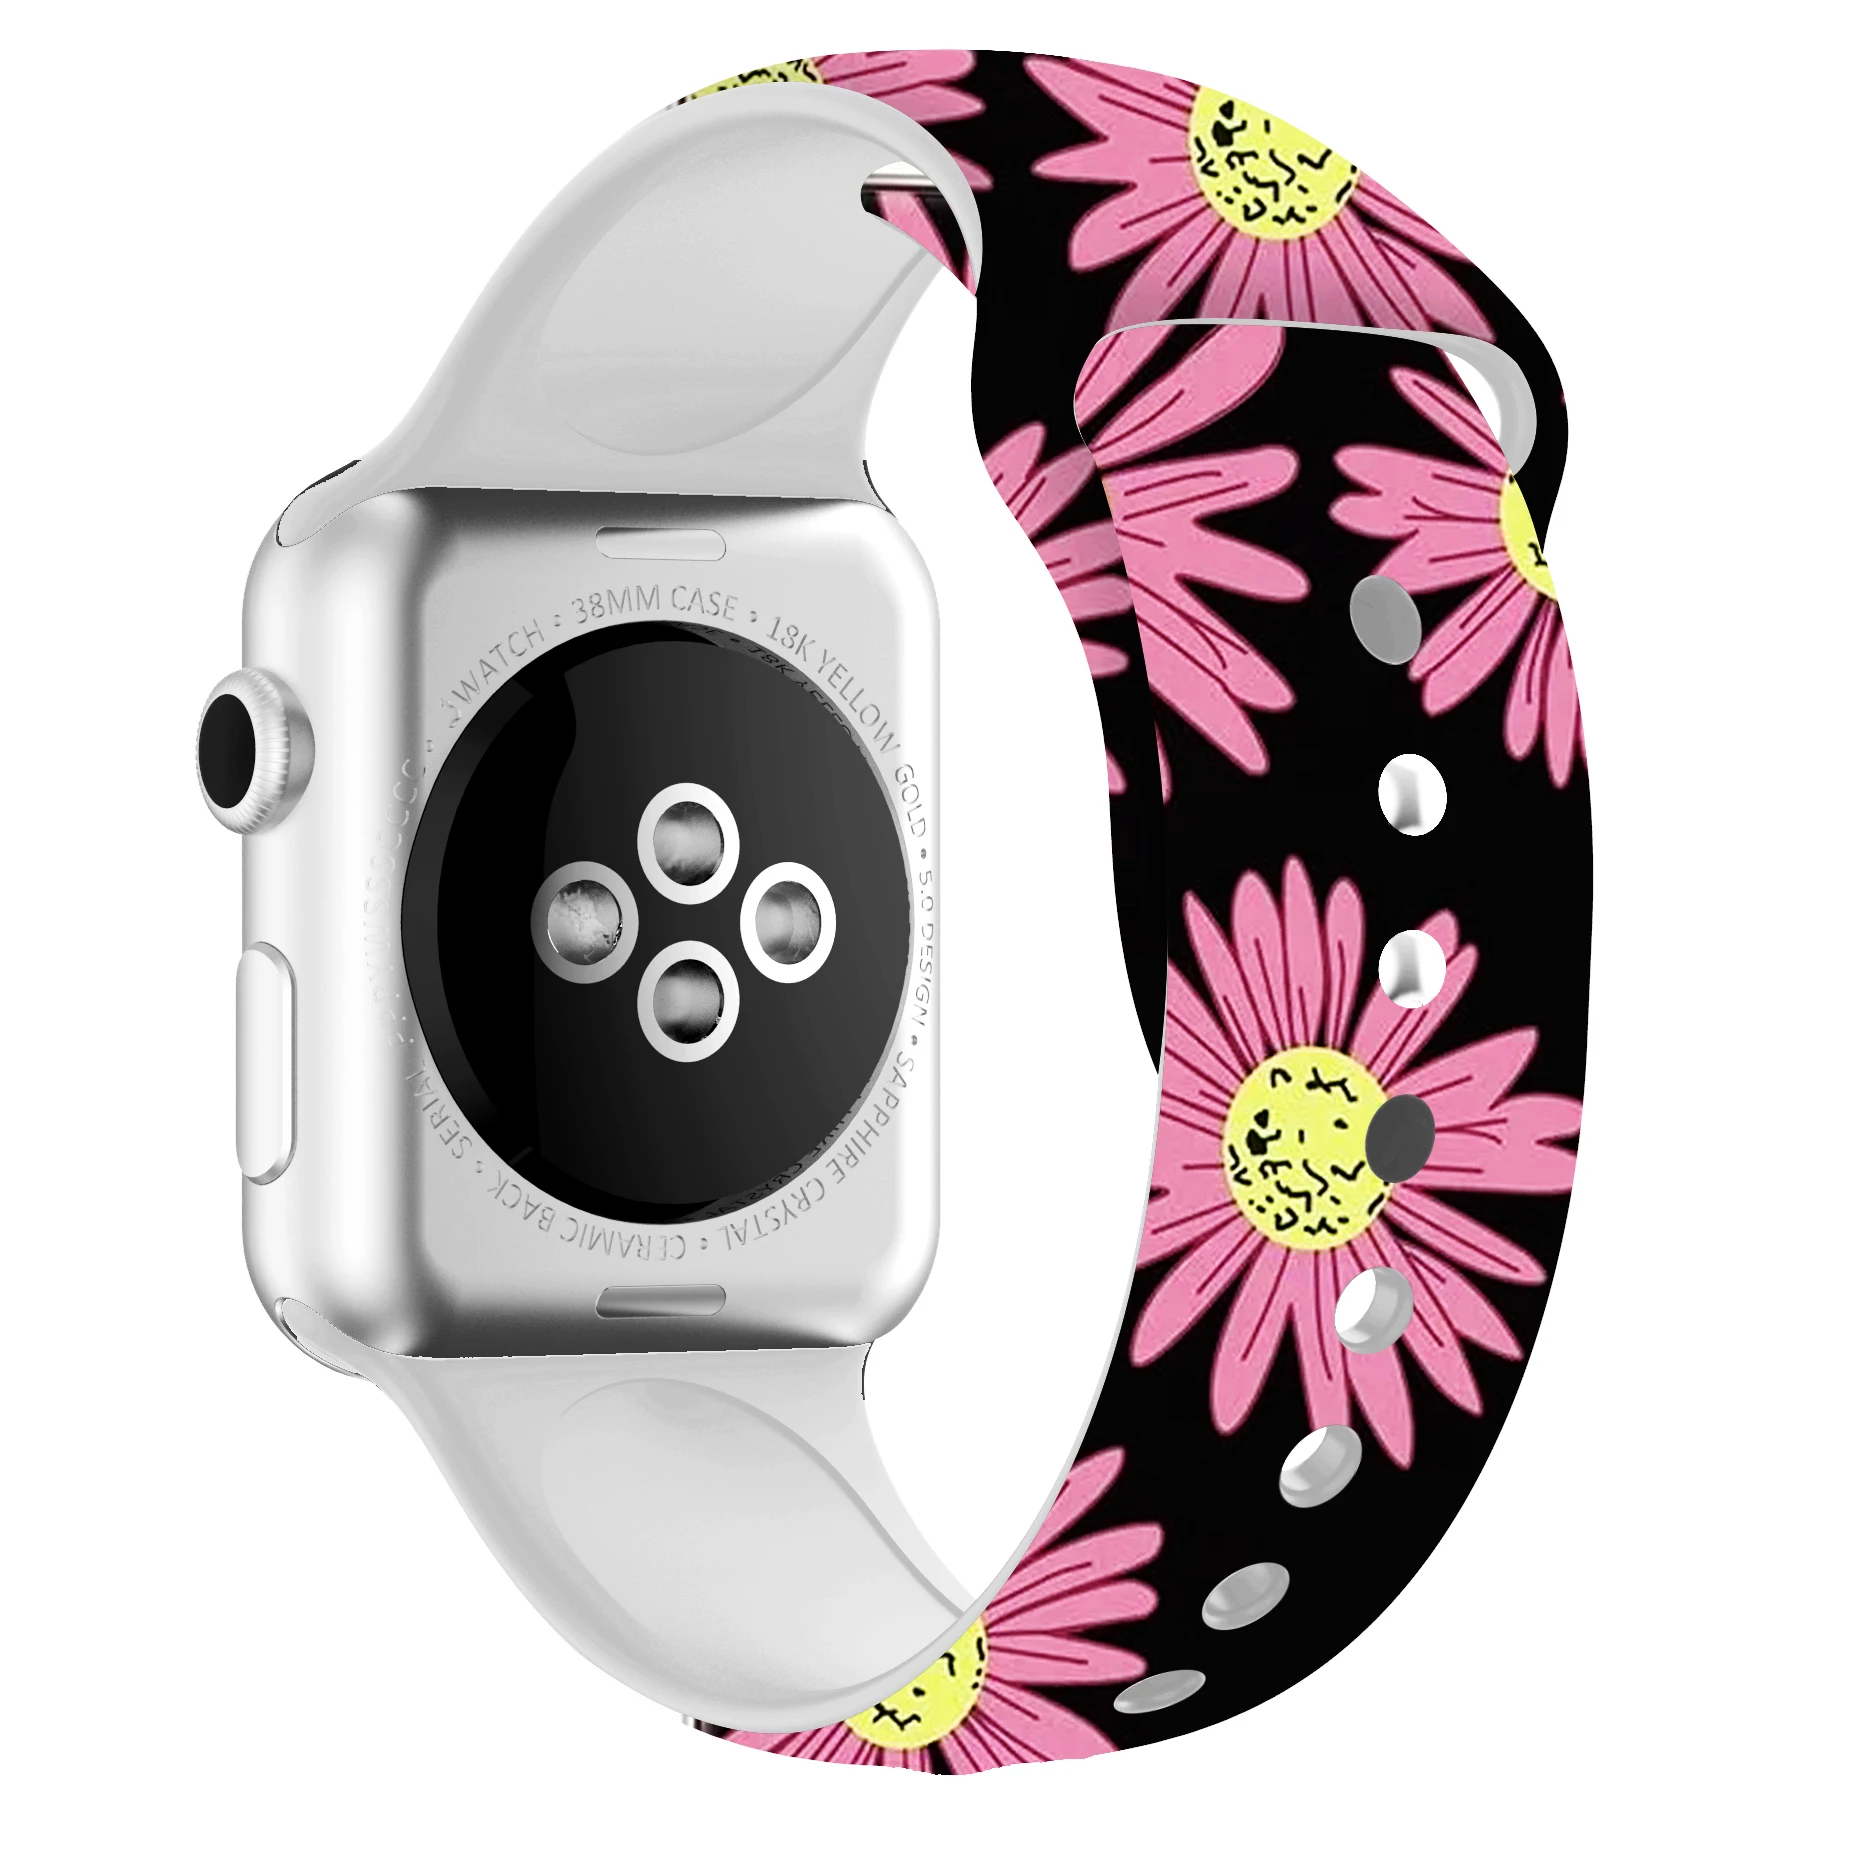 40mm 44mm Silicone Christmas Band For Apple watch 5 4 3 2 1 Bands Floral Printed Strap for iWatch Series 5 4 3 2 38mm 42mm Gifts